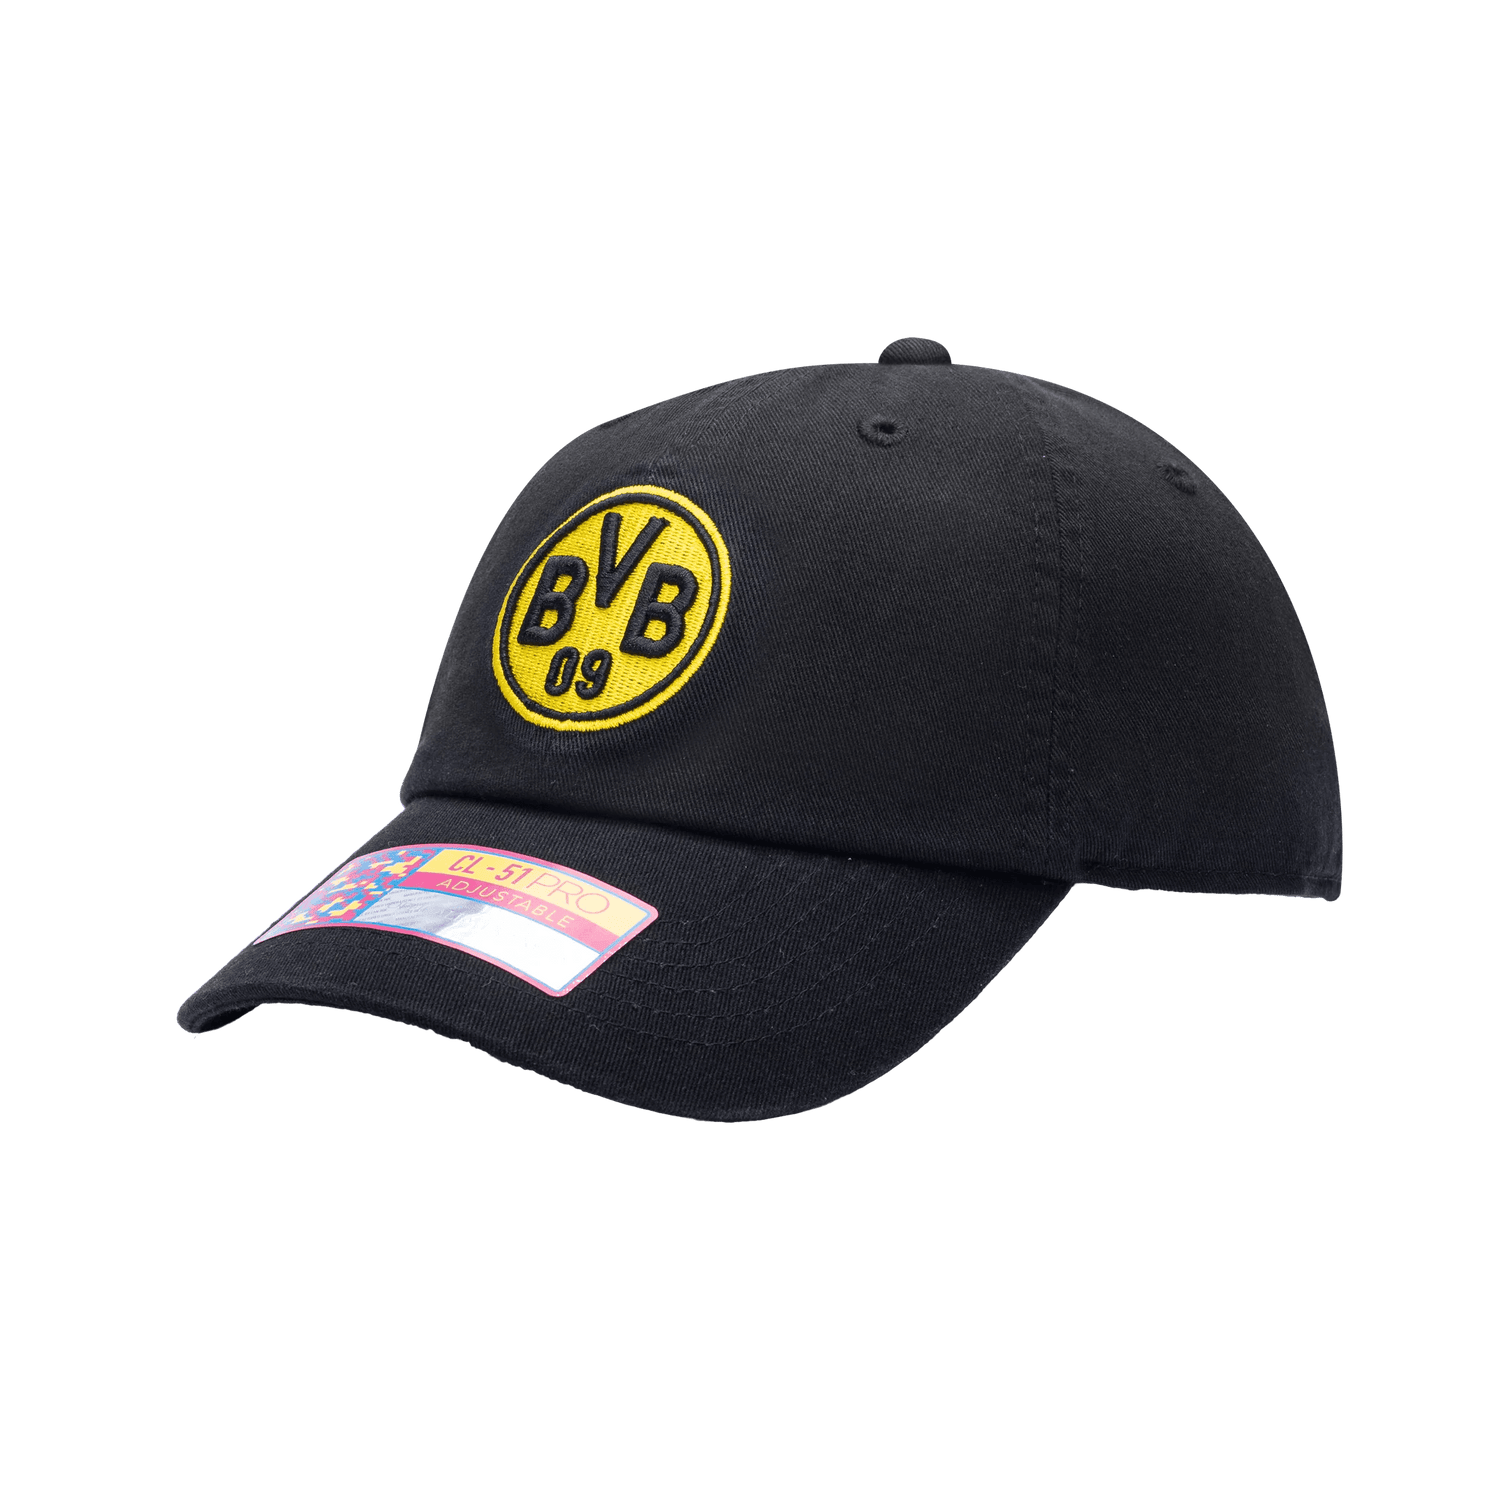 FI Collection Club Borussia Dortmund Bambo Classic Hat (Lateral - Side 1)